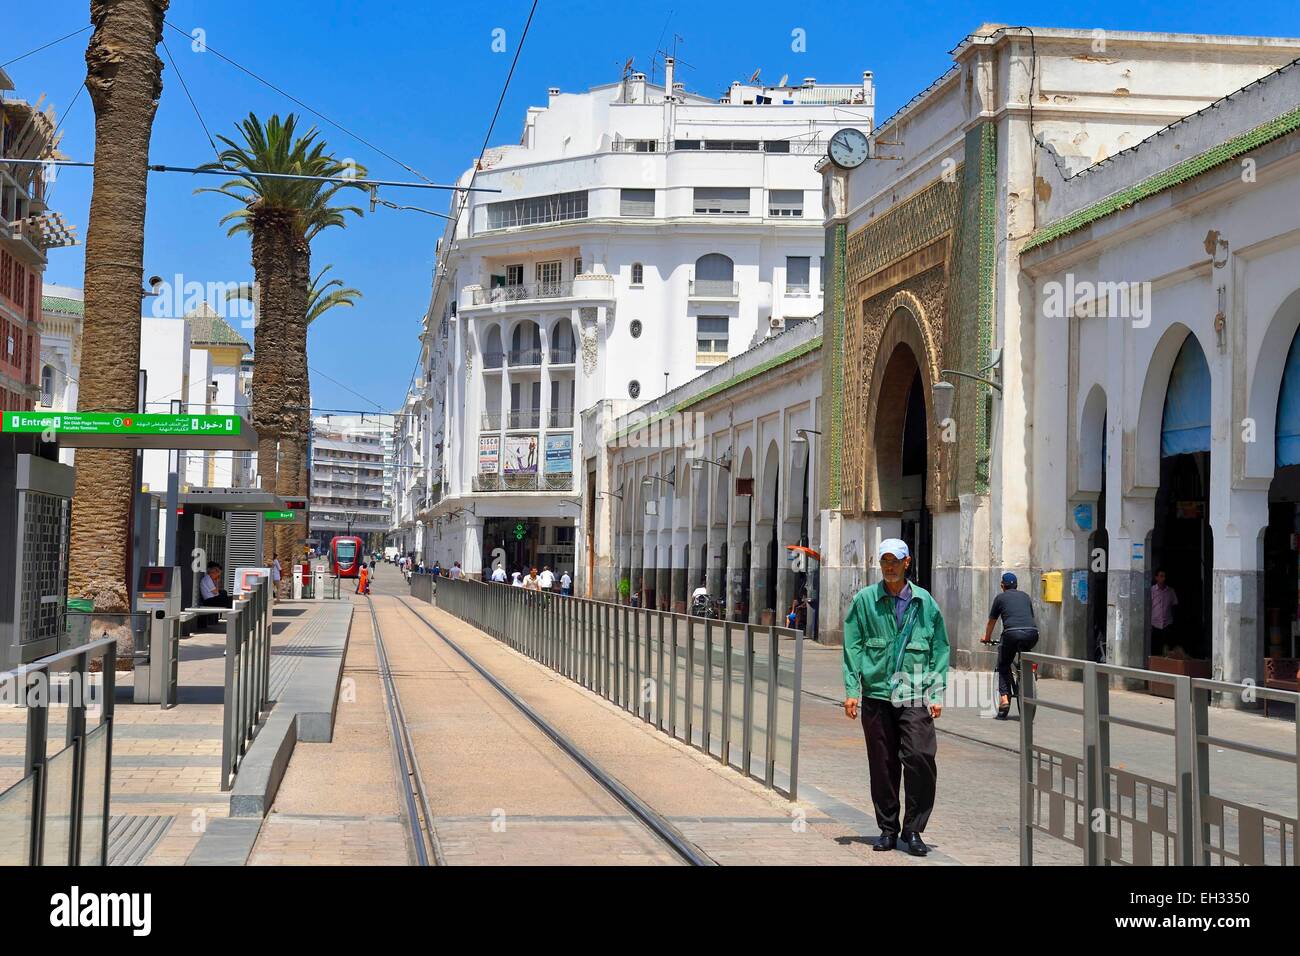 Morocco, Casablanca, Mohammed V boulevard, the central Market built in 1917 by architect Pierre Bousquet Stock Photo